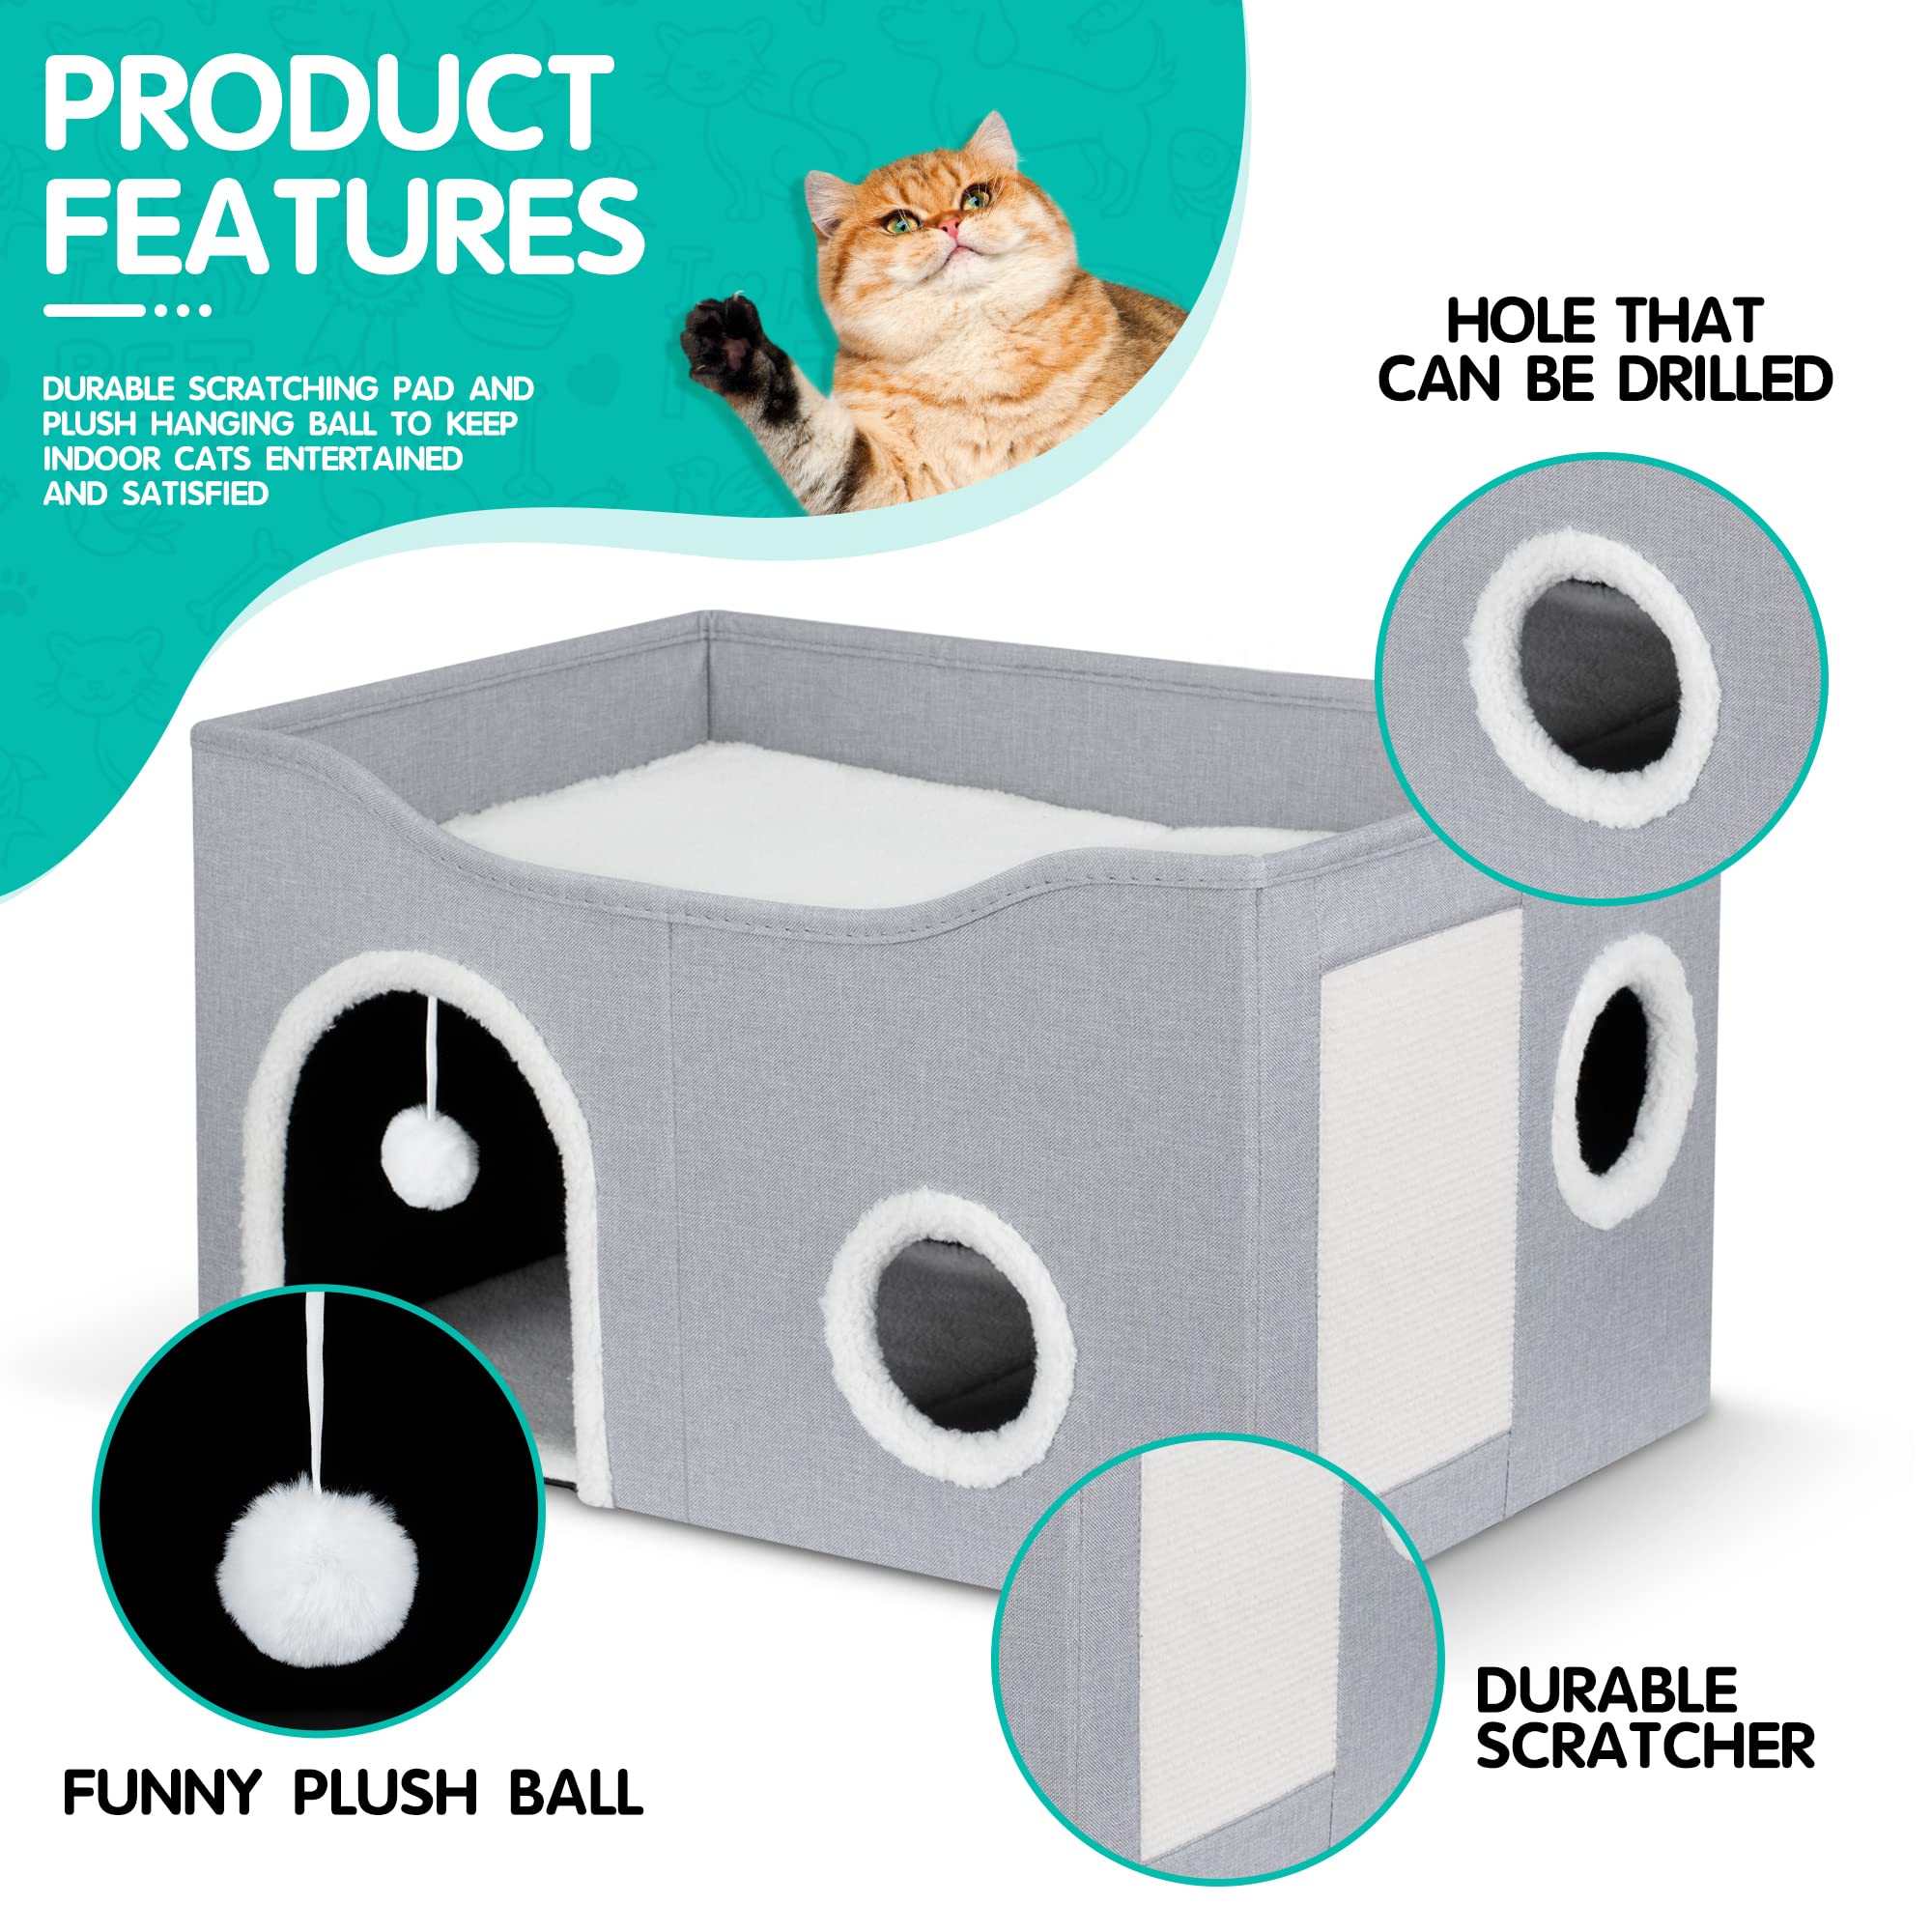 Heeyoo Cat House for Indoor Cats - Large Cat Bed Cave with Fluffy Ball and Scratch Pad, Foldable Cat Condos, Cat Cubes, Cat Hideaway, Covered Cat Bed